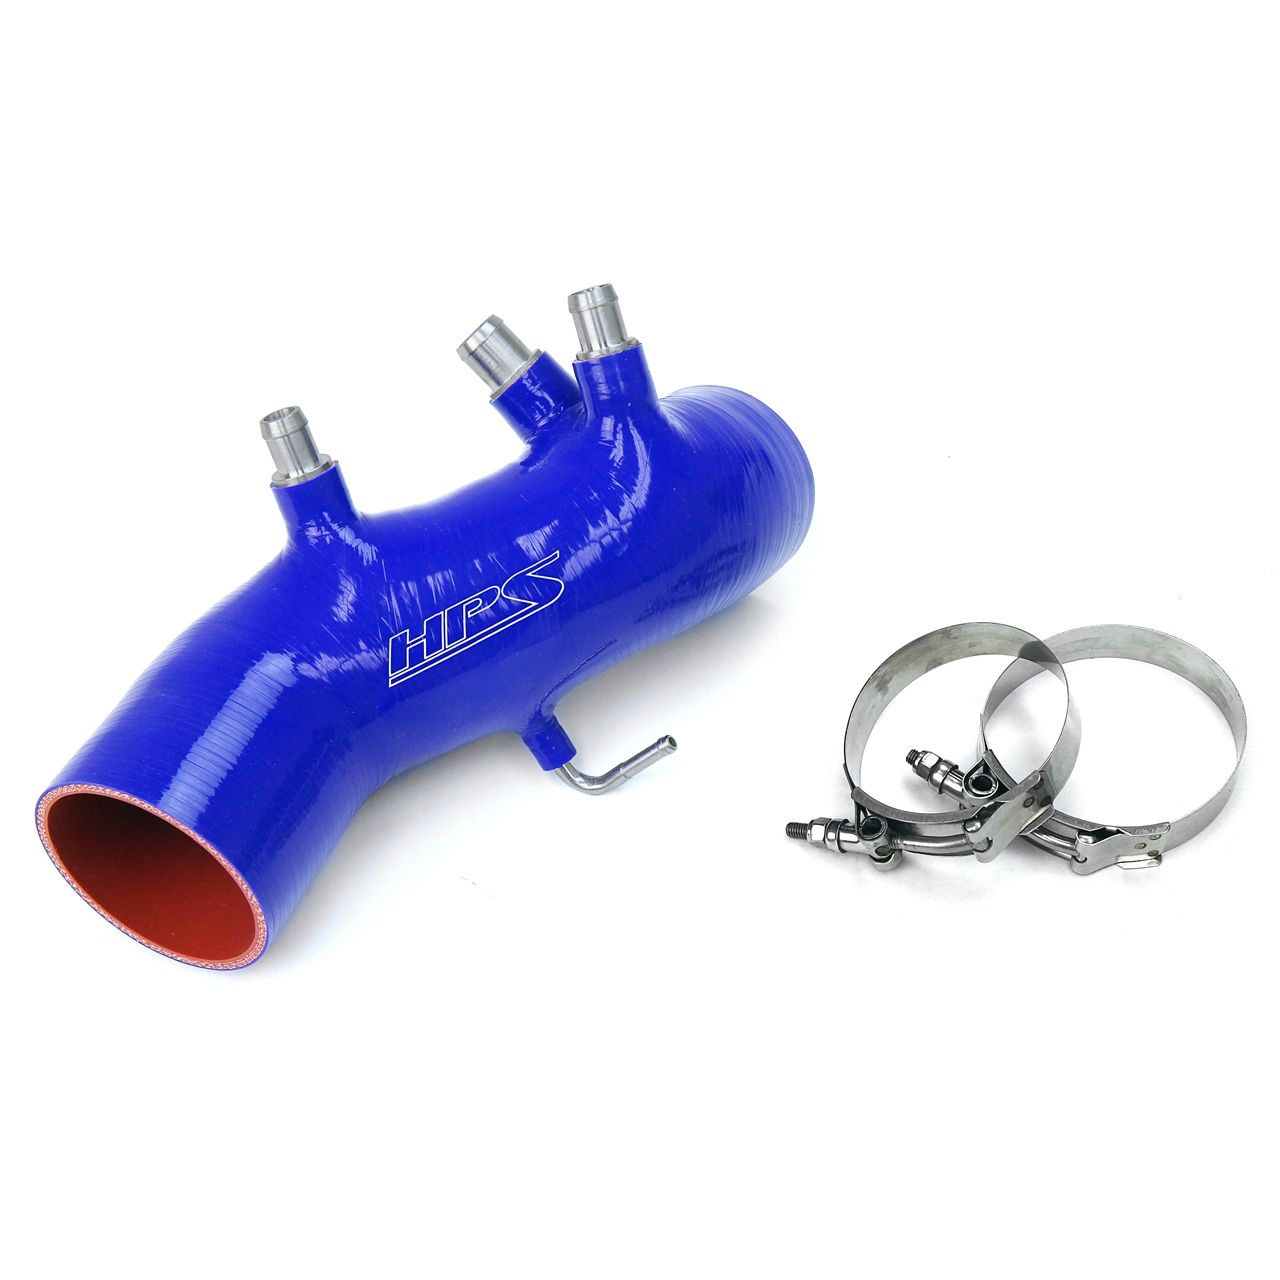 HPS Blue Reinforced Silicone Post MAF Air Intake Hose Kit for Toyota 86-92 Supra 7MGTE Turbo